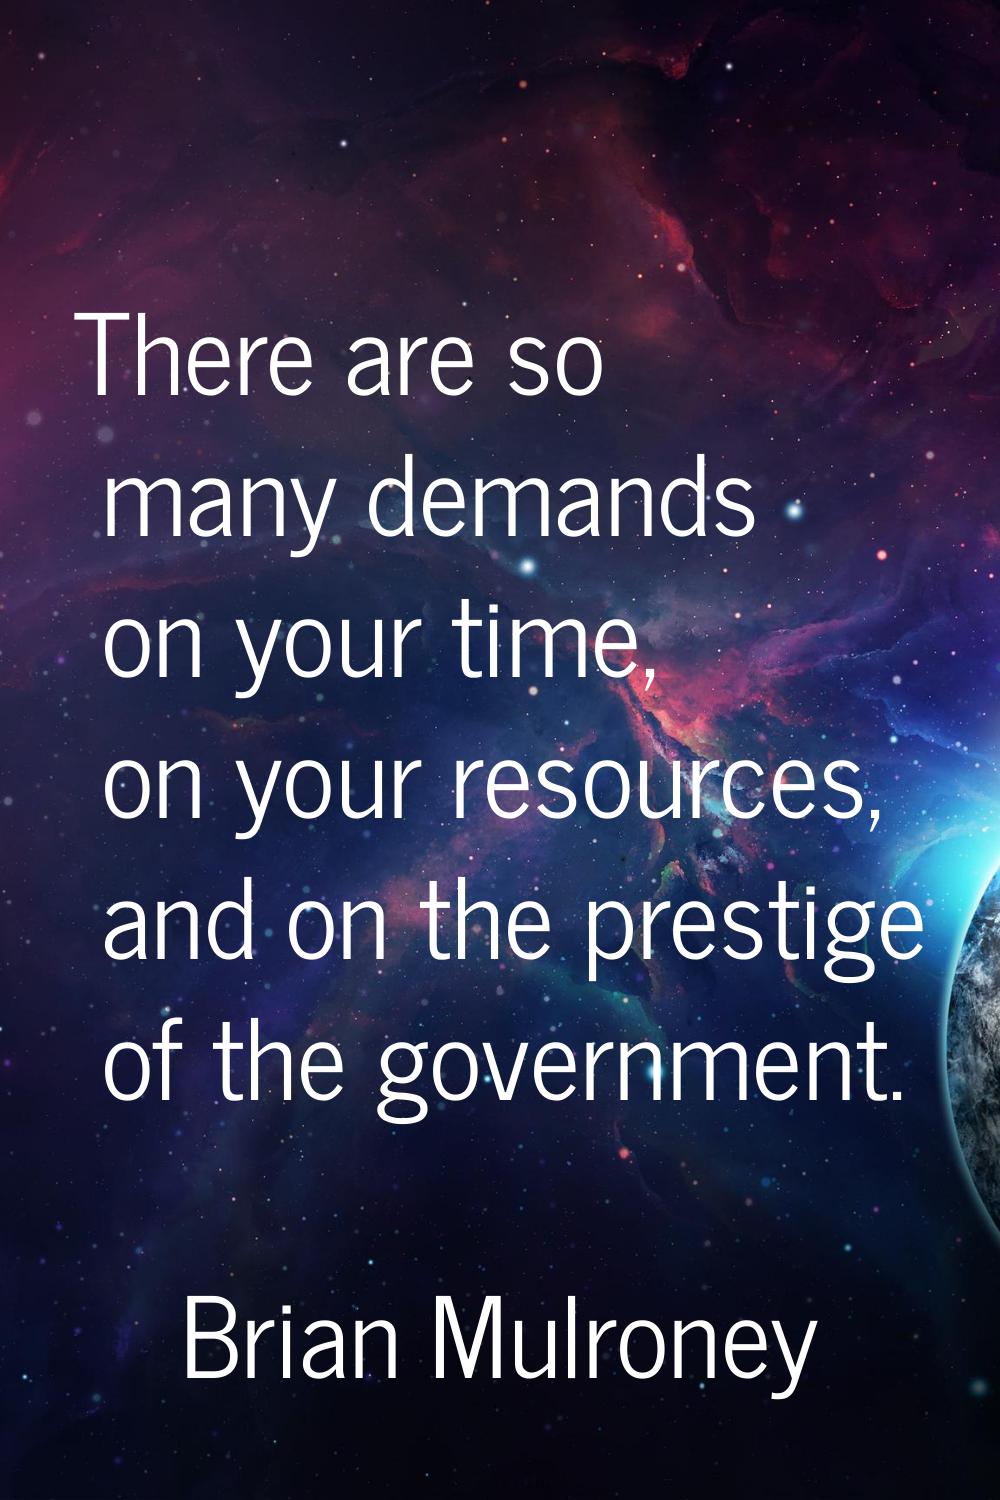 There are so many demands on your time, on your resources, and on the prestige of the government.